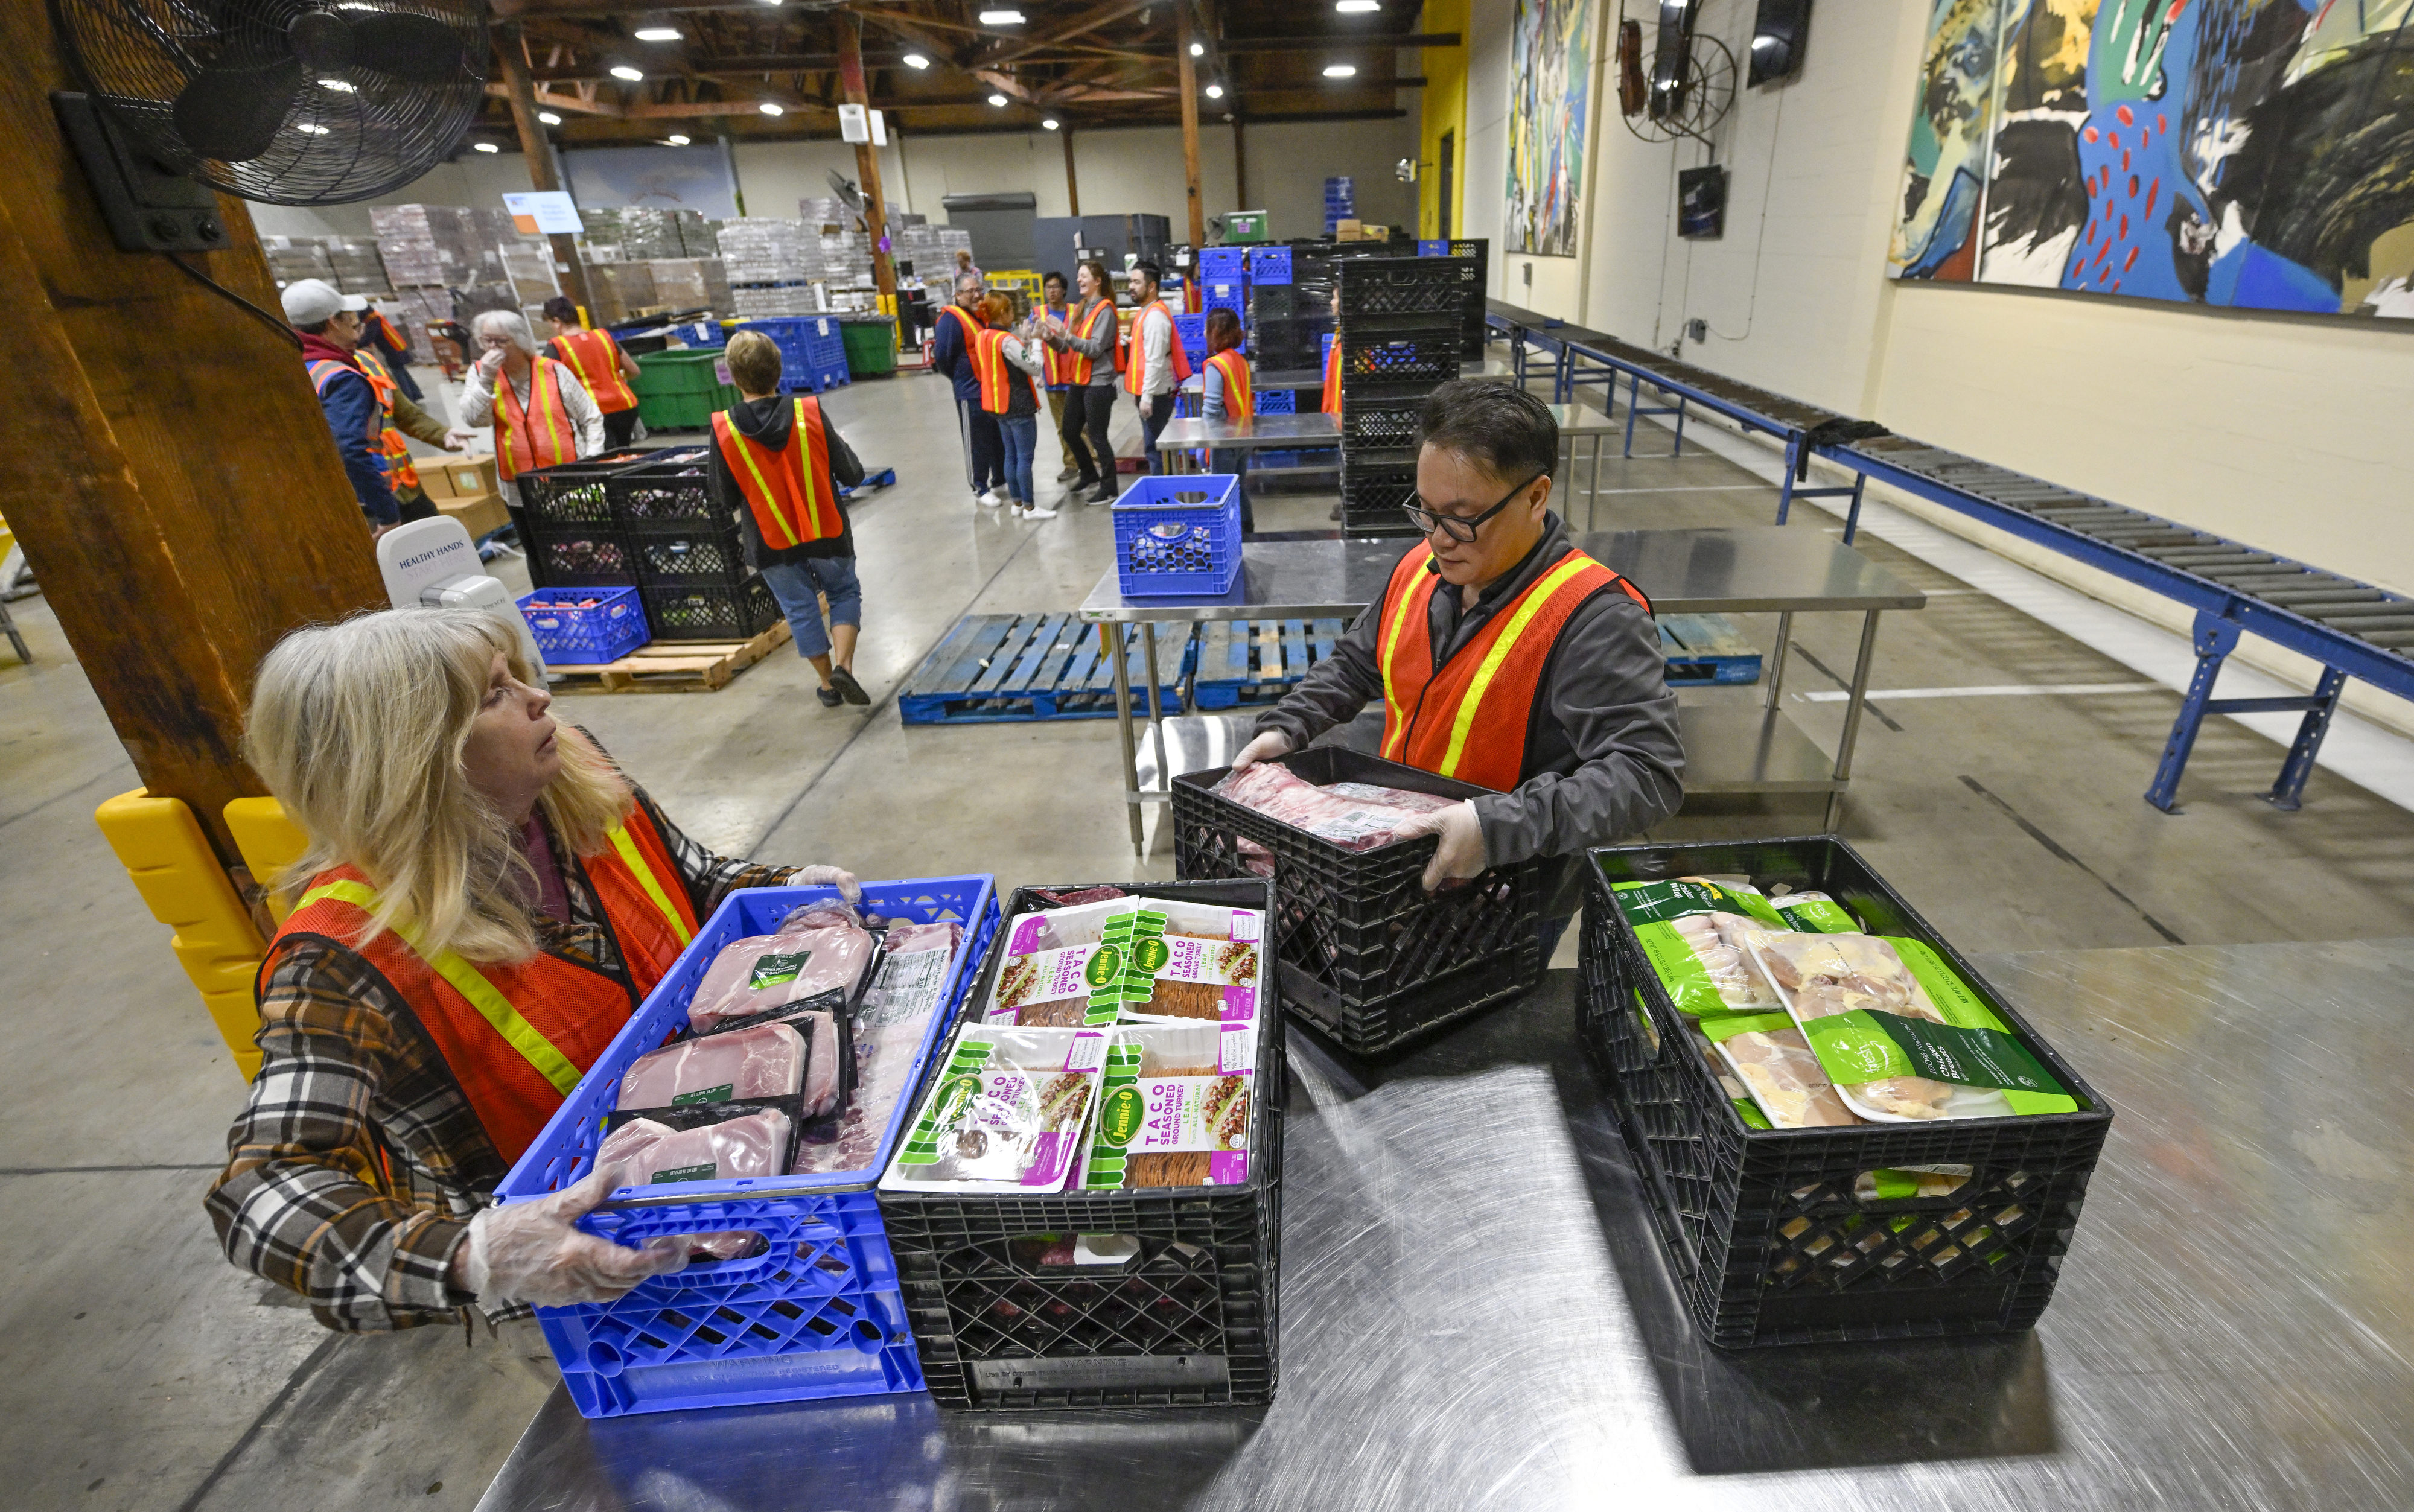 Volunteers sort through food donated by Amazon Fresh at a grocery rescue station inside Second Harvest Food Bank in Irvine, CA, on Thursday, December 1, 2022. (Jeff Gritchen––MediaNews Group/Orange County Register via Getty Images)